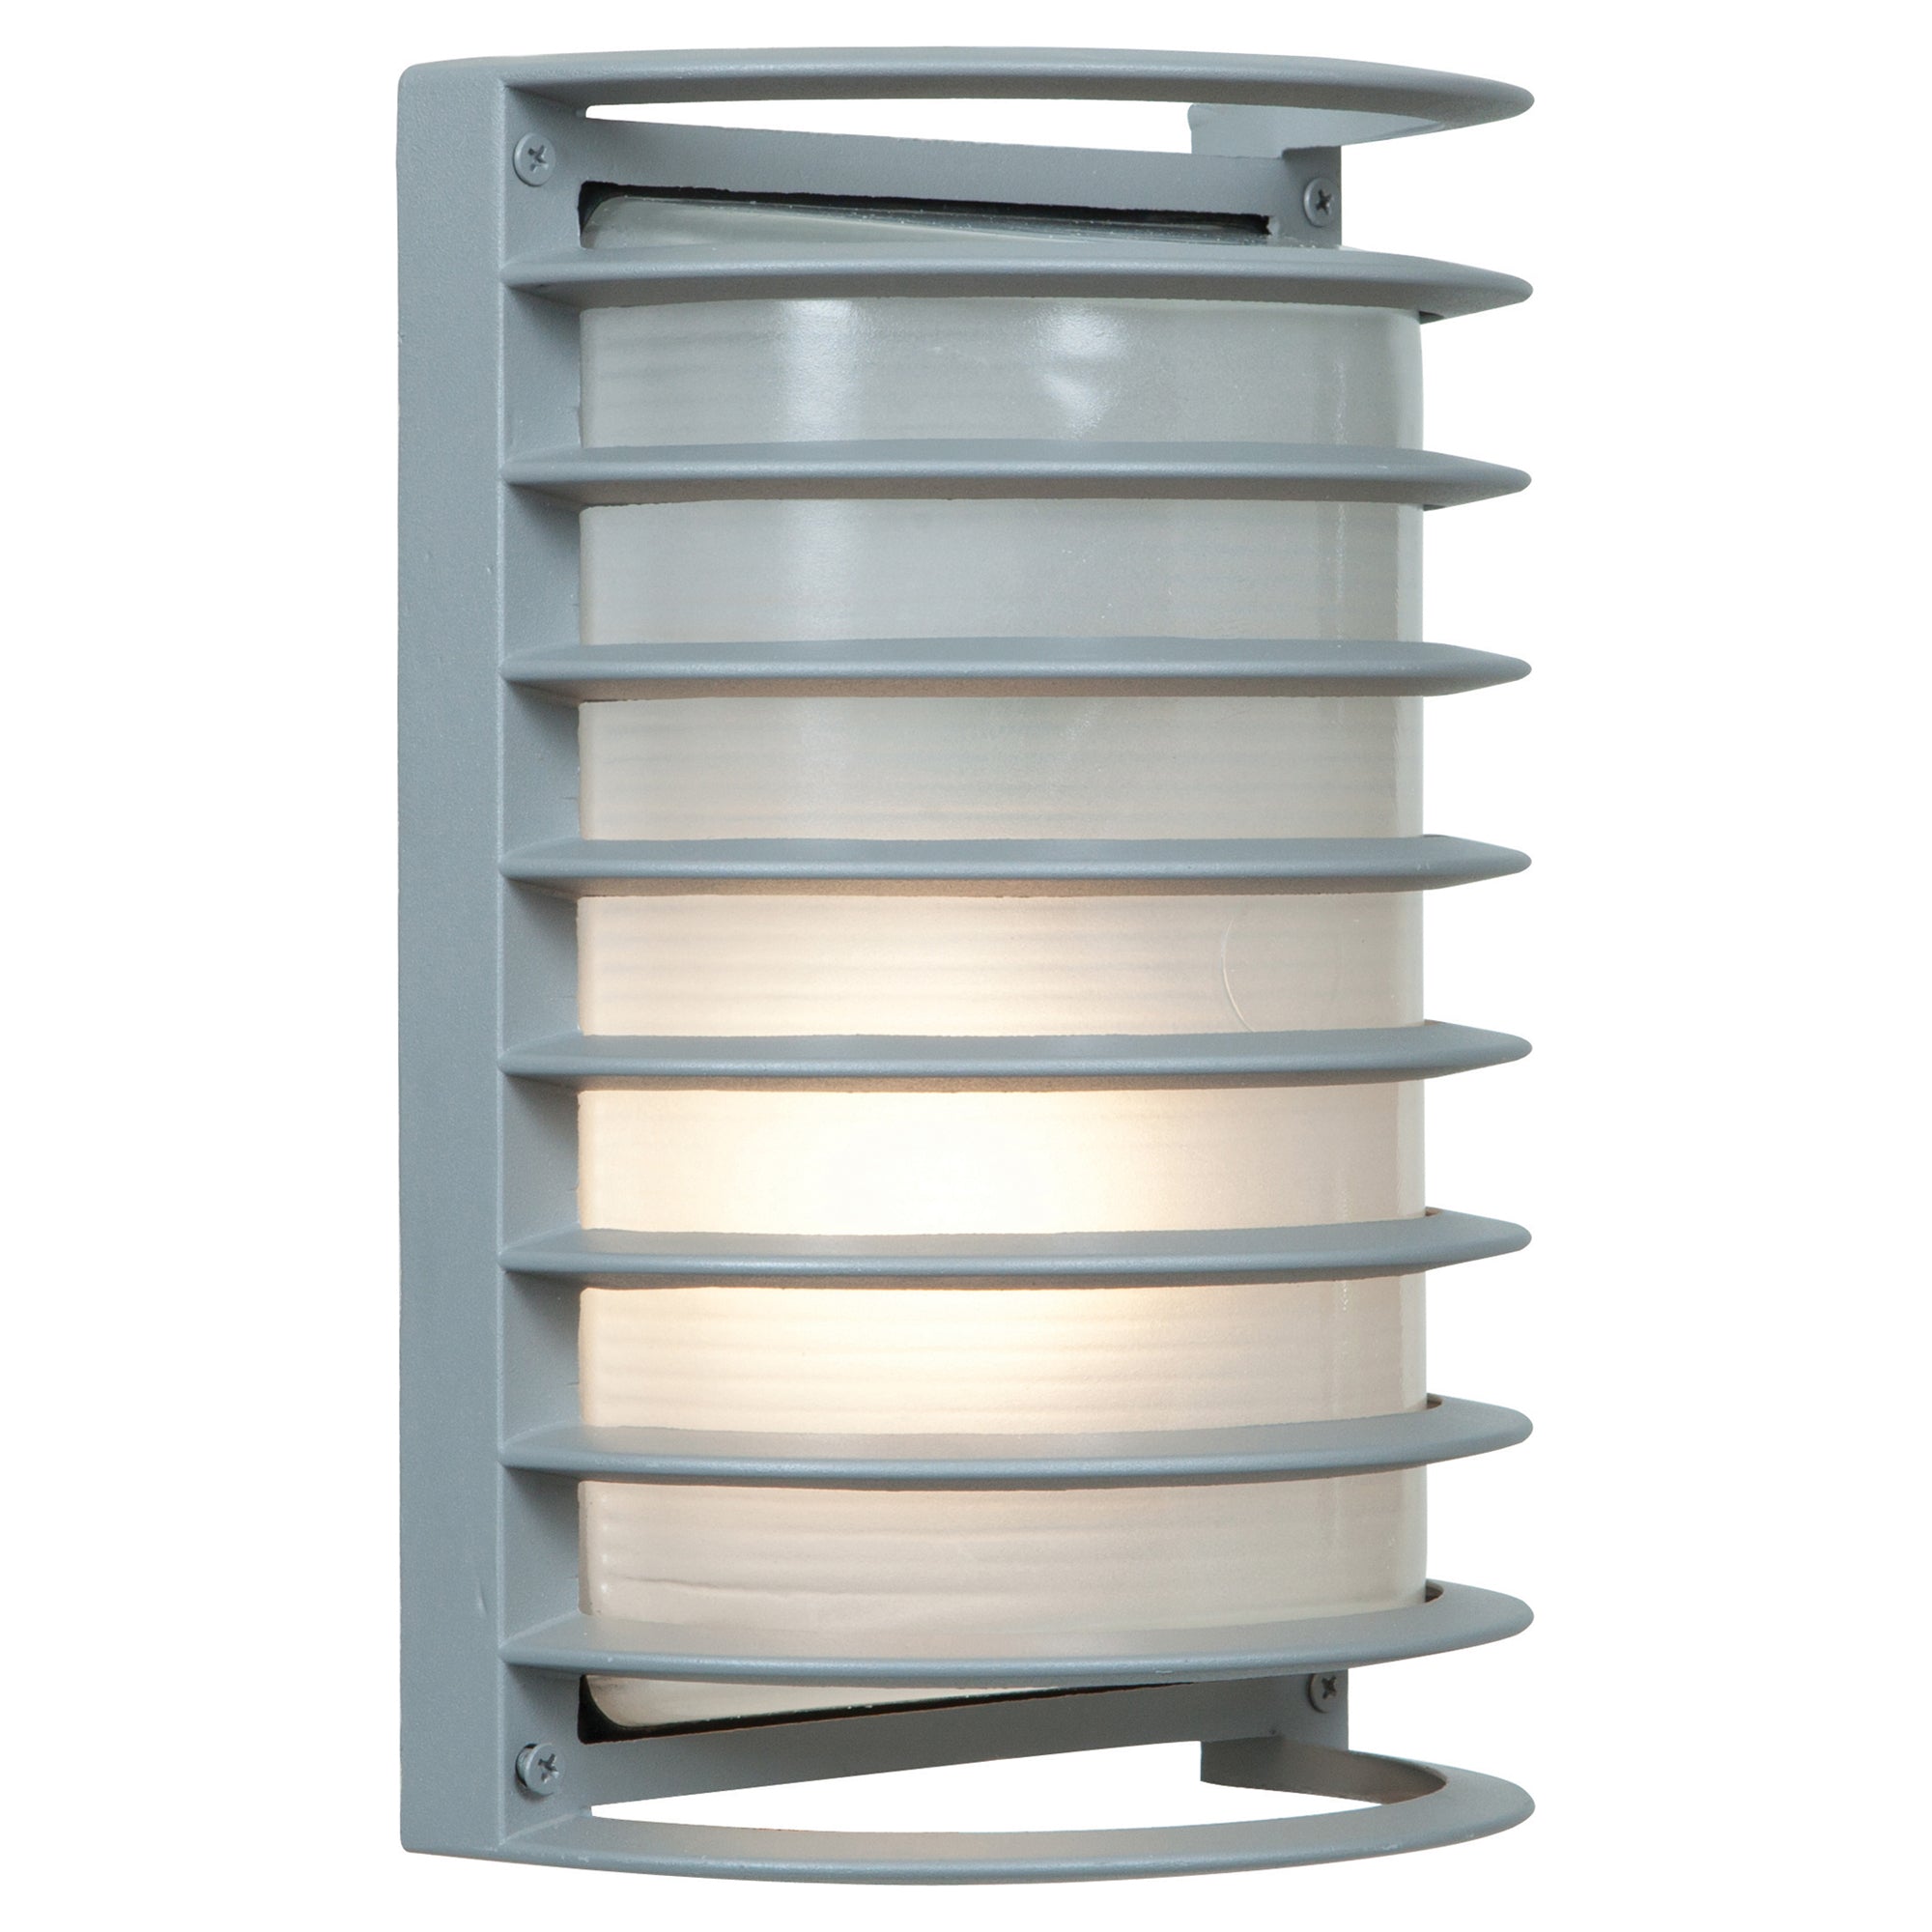 Bermuda 10.5 in Outdoor LED 1-Light Wall Mount Sconce